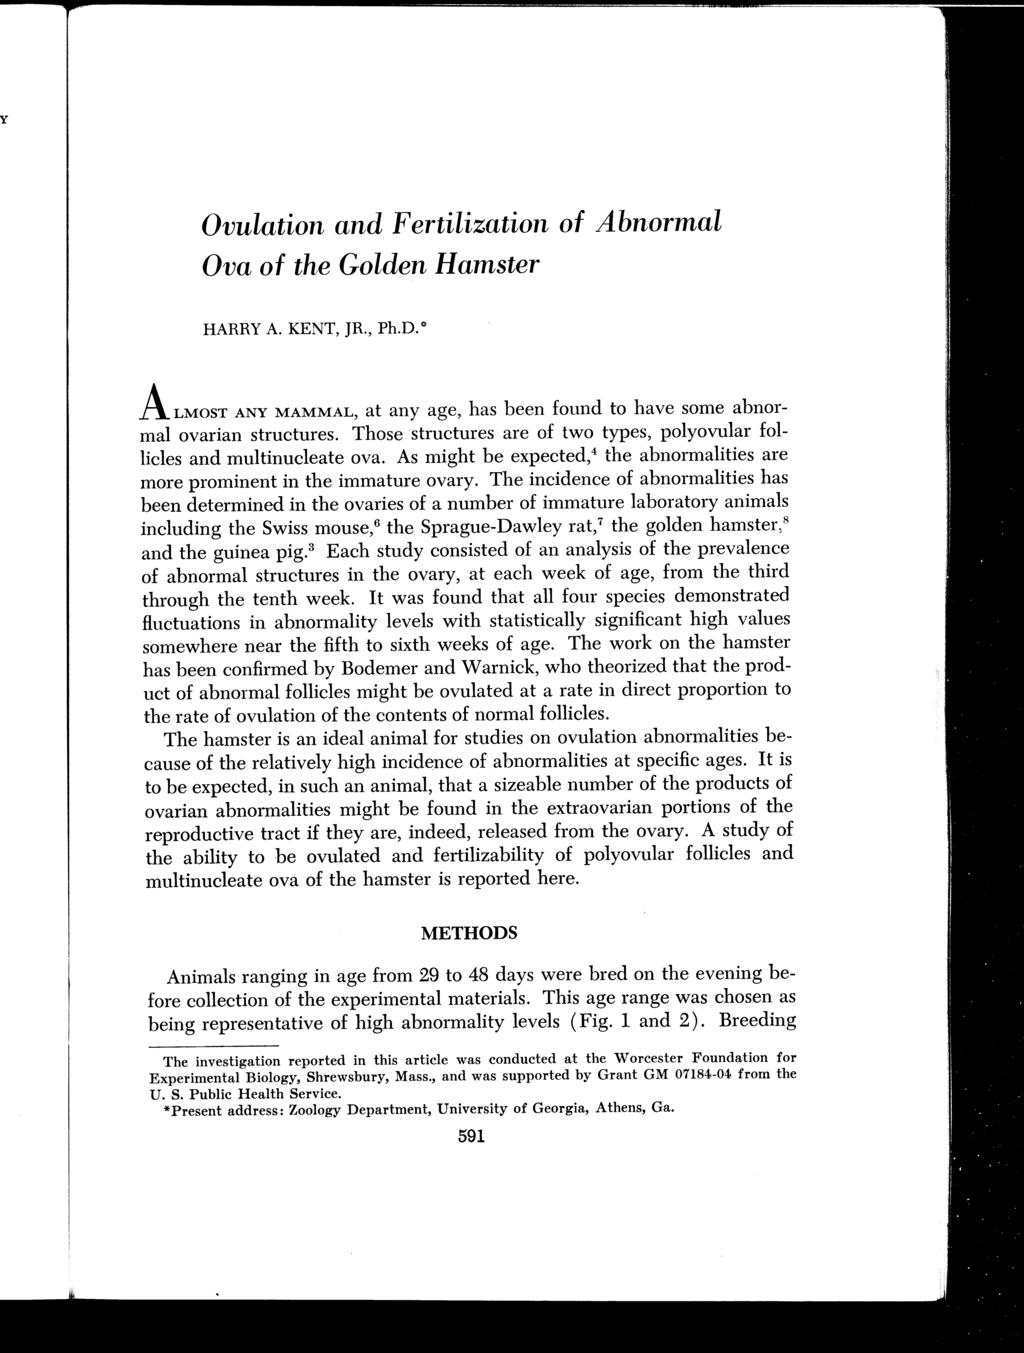 Ovulation and Fertilization of Abnormal Ova of the Golden Hamster HARRY A. KENT, JR., Ph.D." A LMOST ANY MAMMAL, at any age, has been found to have some abnormal ovarian structures.